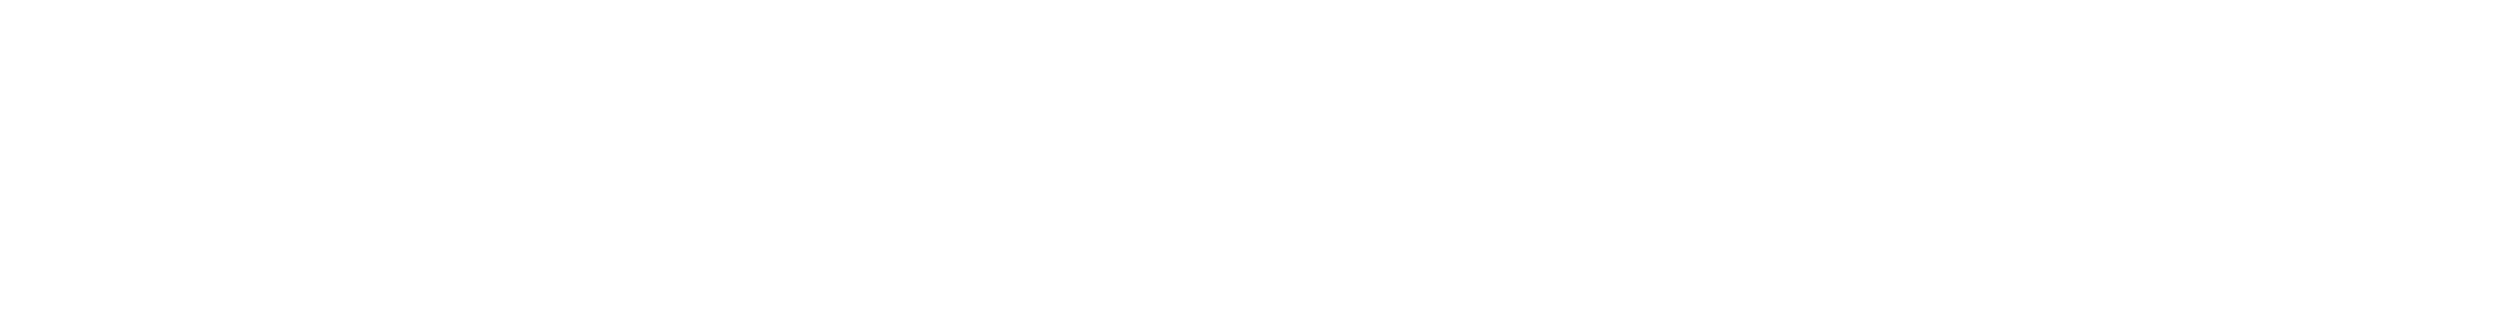 GOOD DAYS,KYOTO パナソニック電材京都株式会社